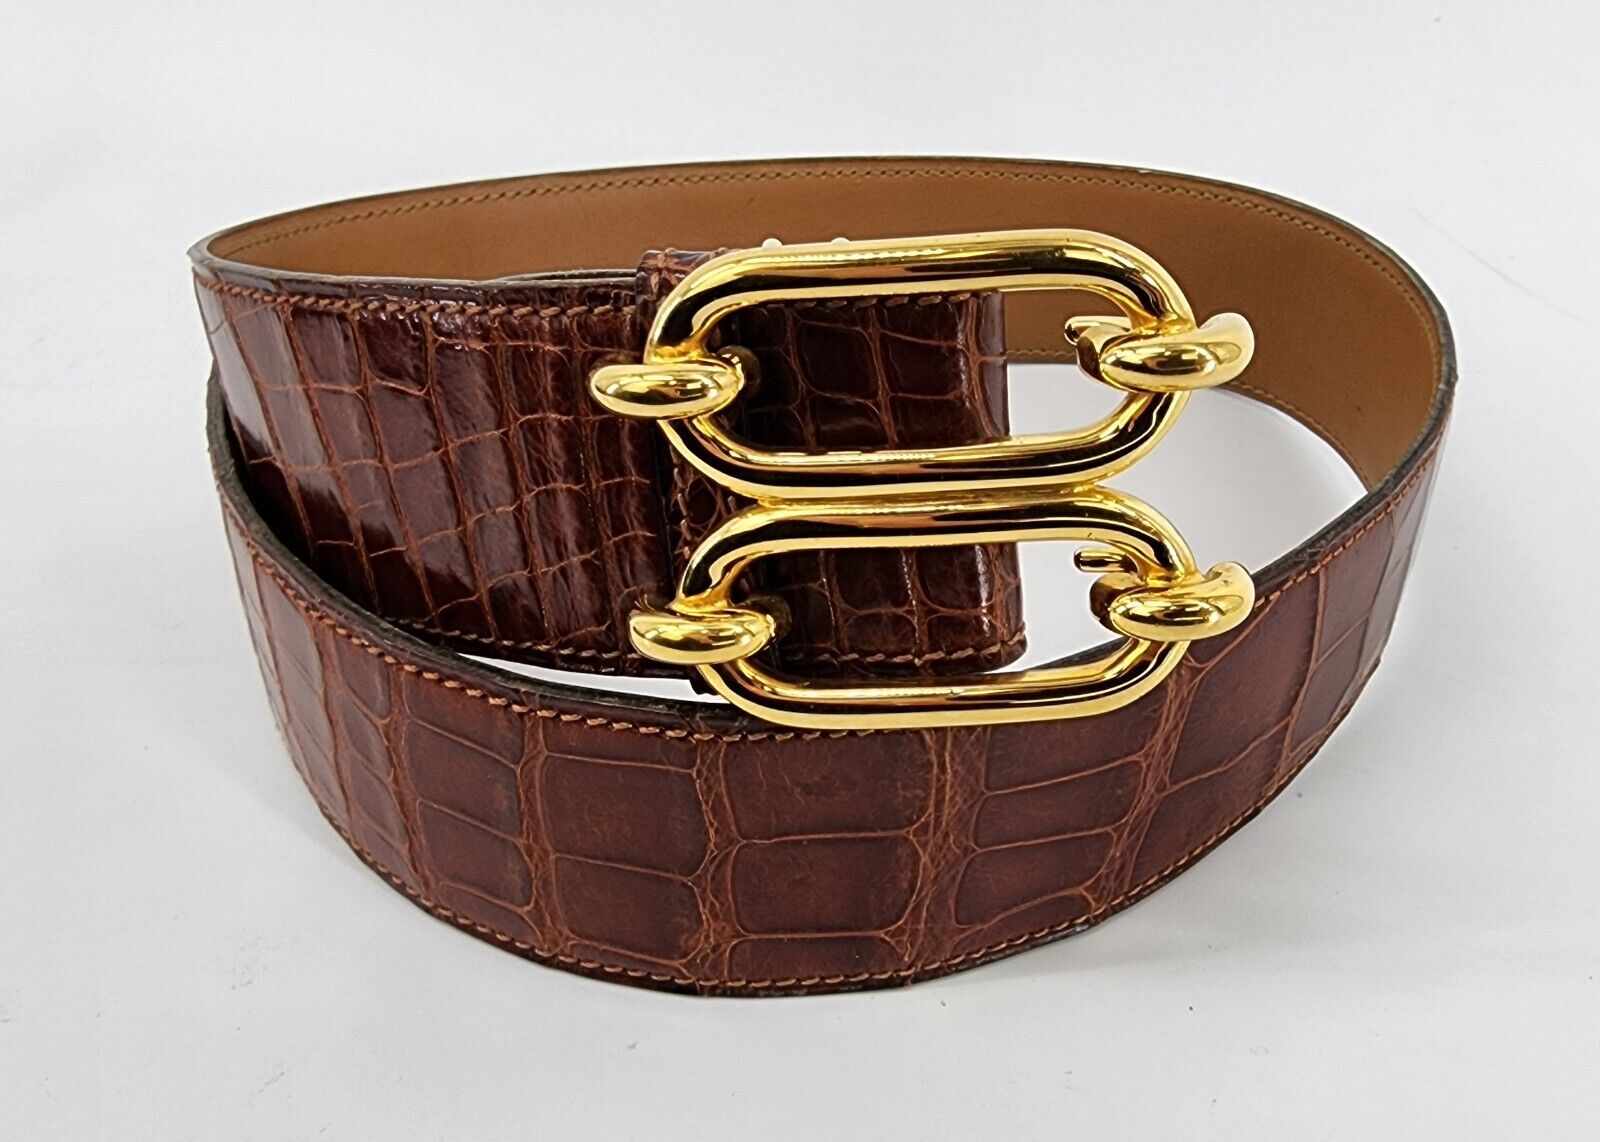 HERMES Classic Ladies Brown Reptile Leather Belt Size 65cm: SHIPS FREE  (19690)